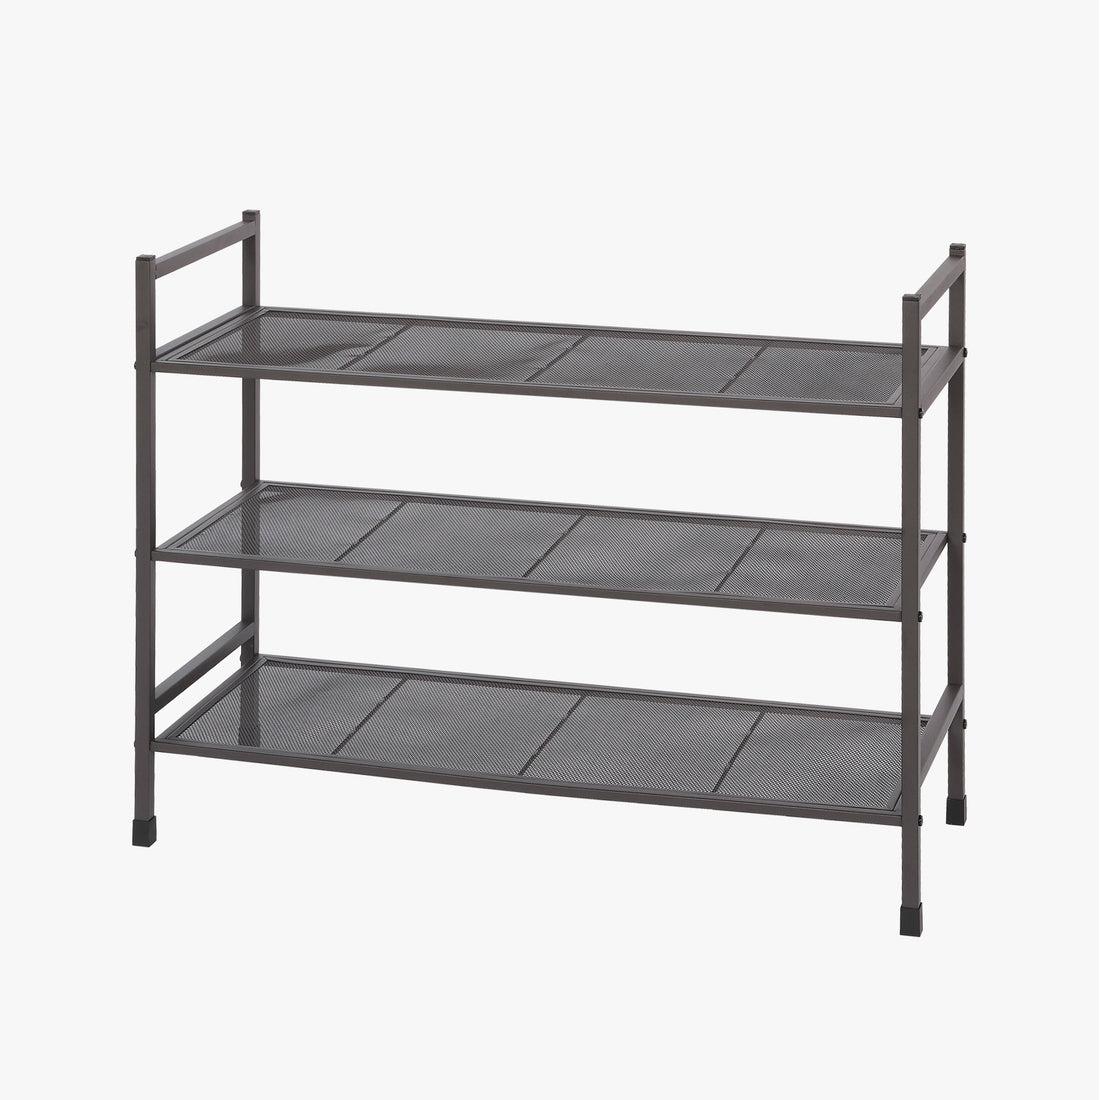 at Home 3-Tier Fabric Shoe Rack, Black